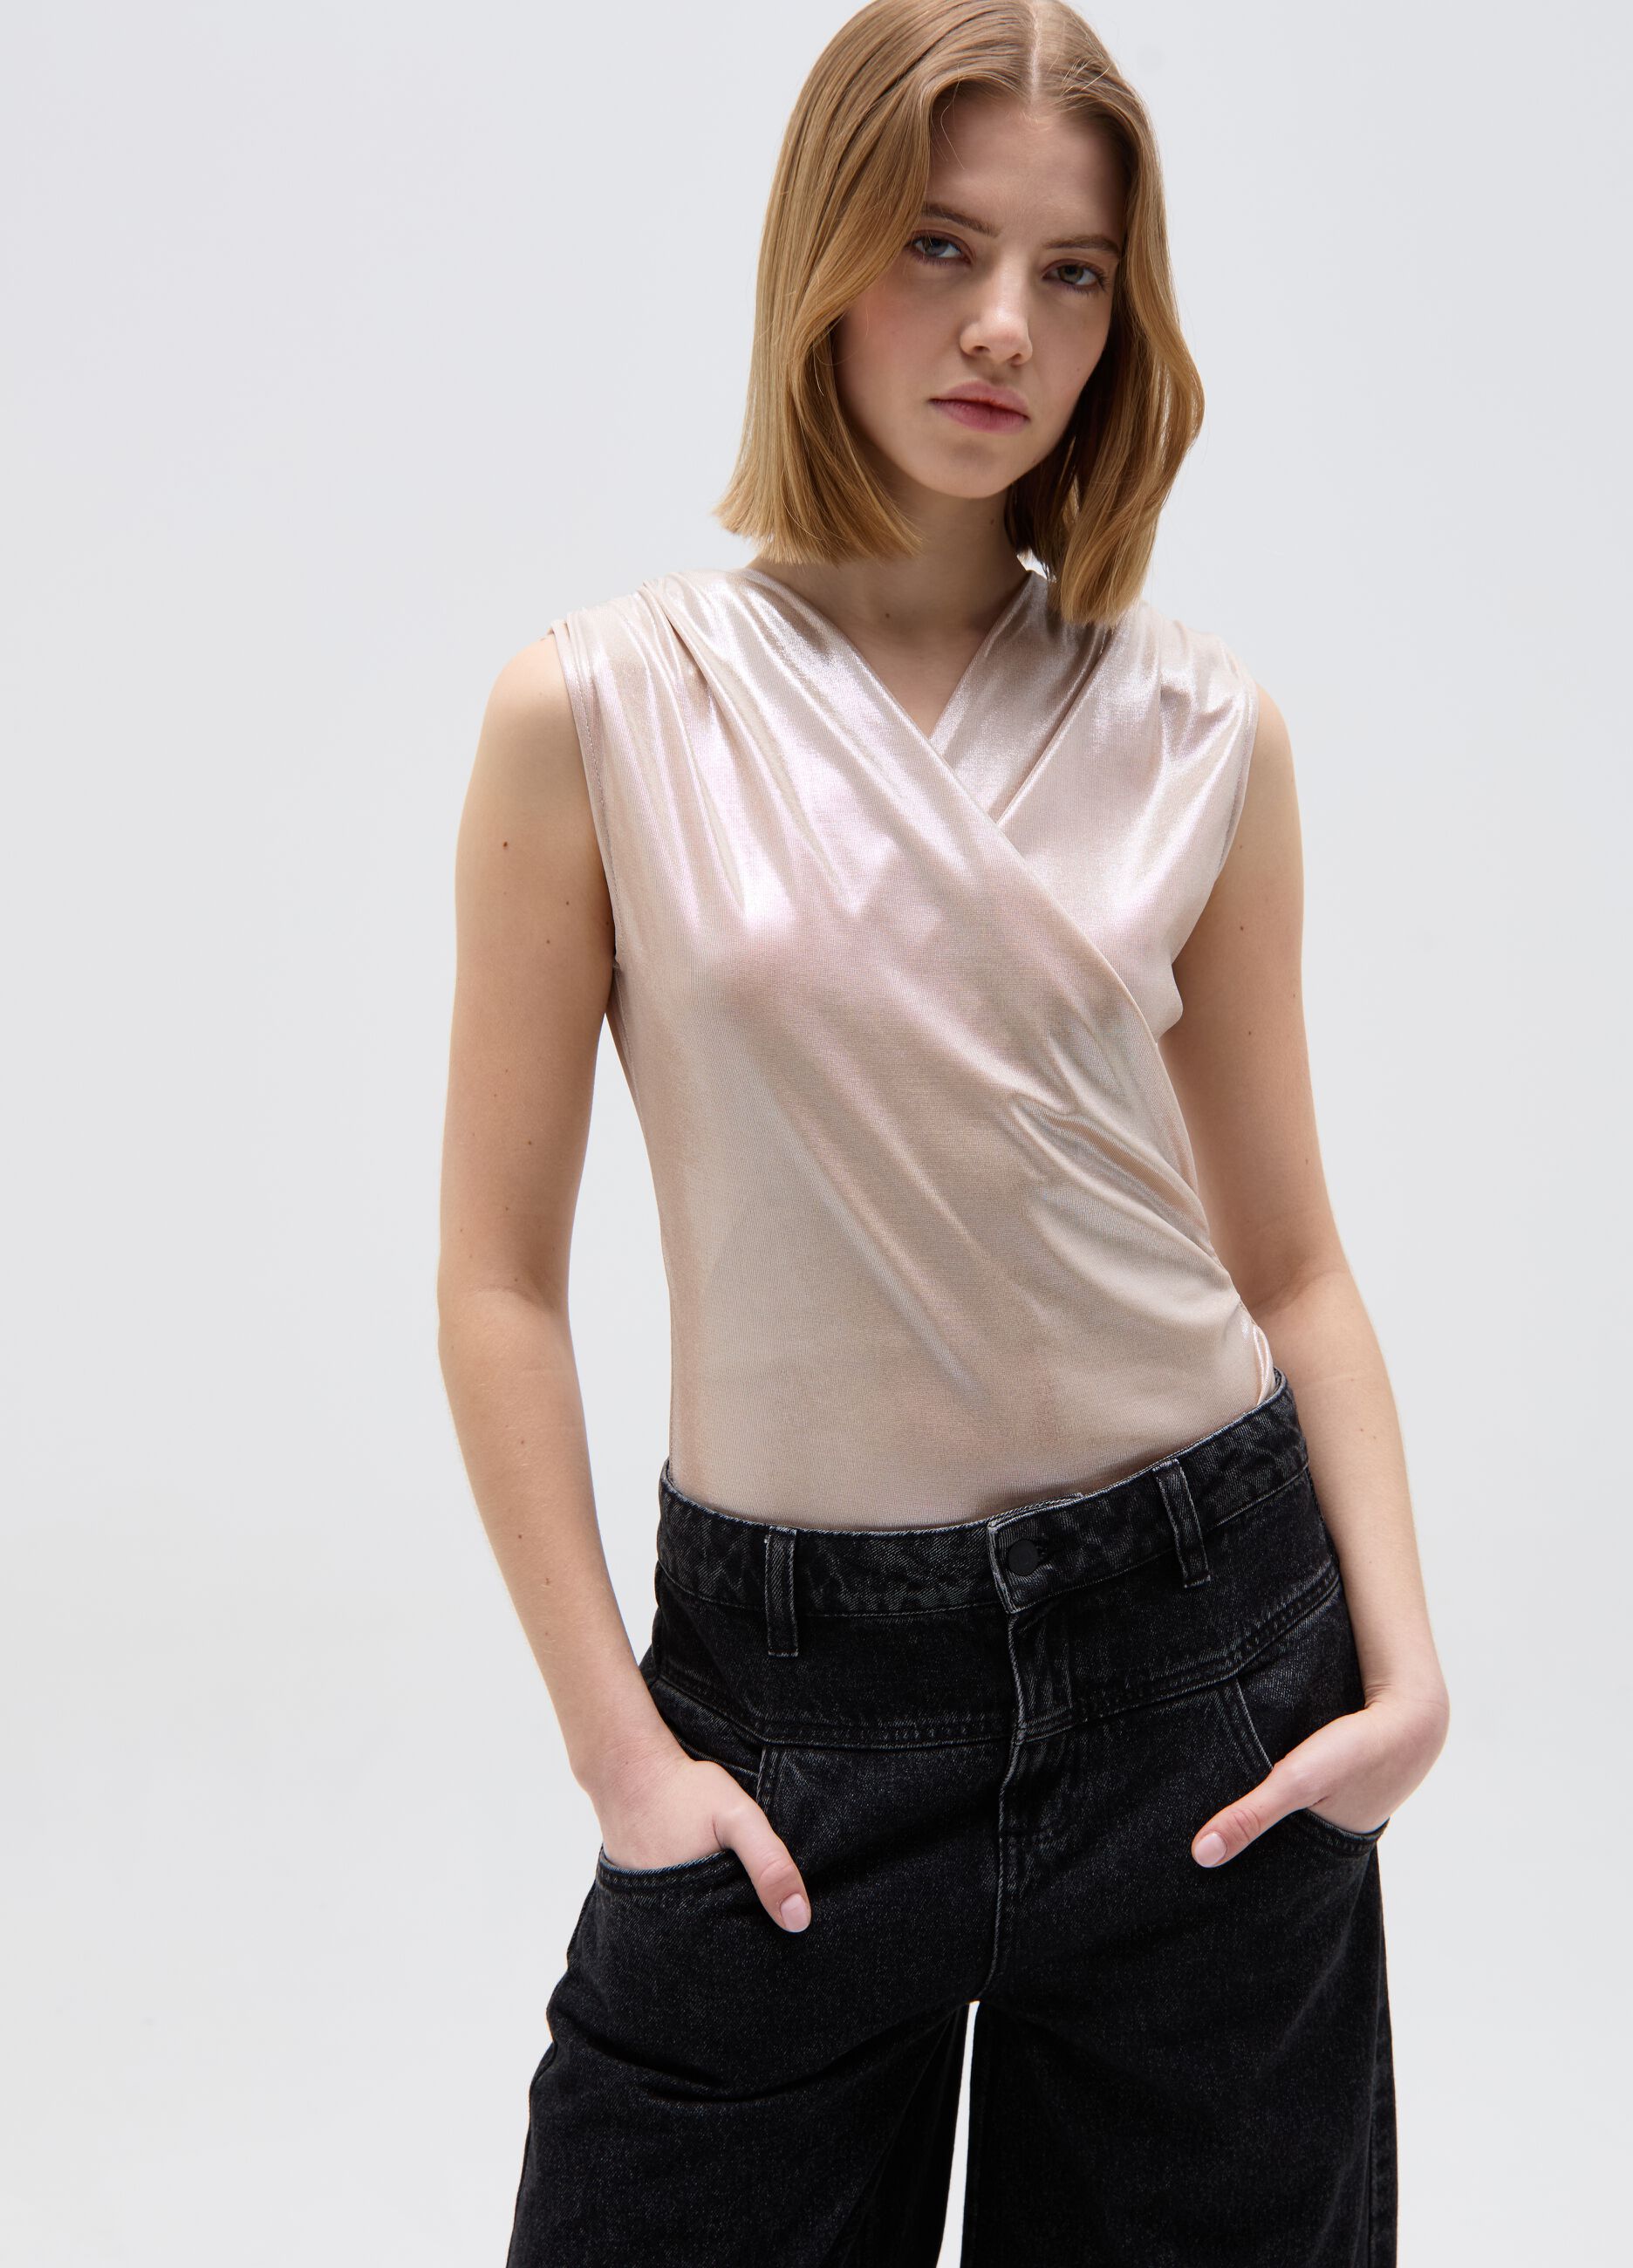 Boxy-fit foil bodysuit with draping